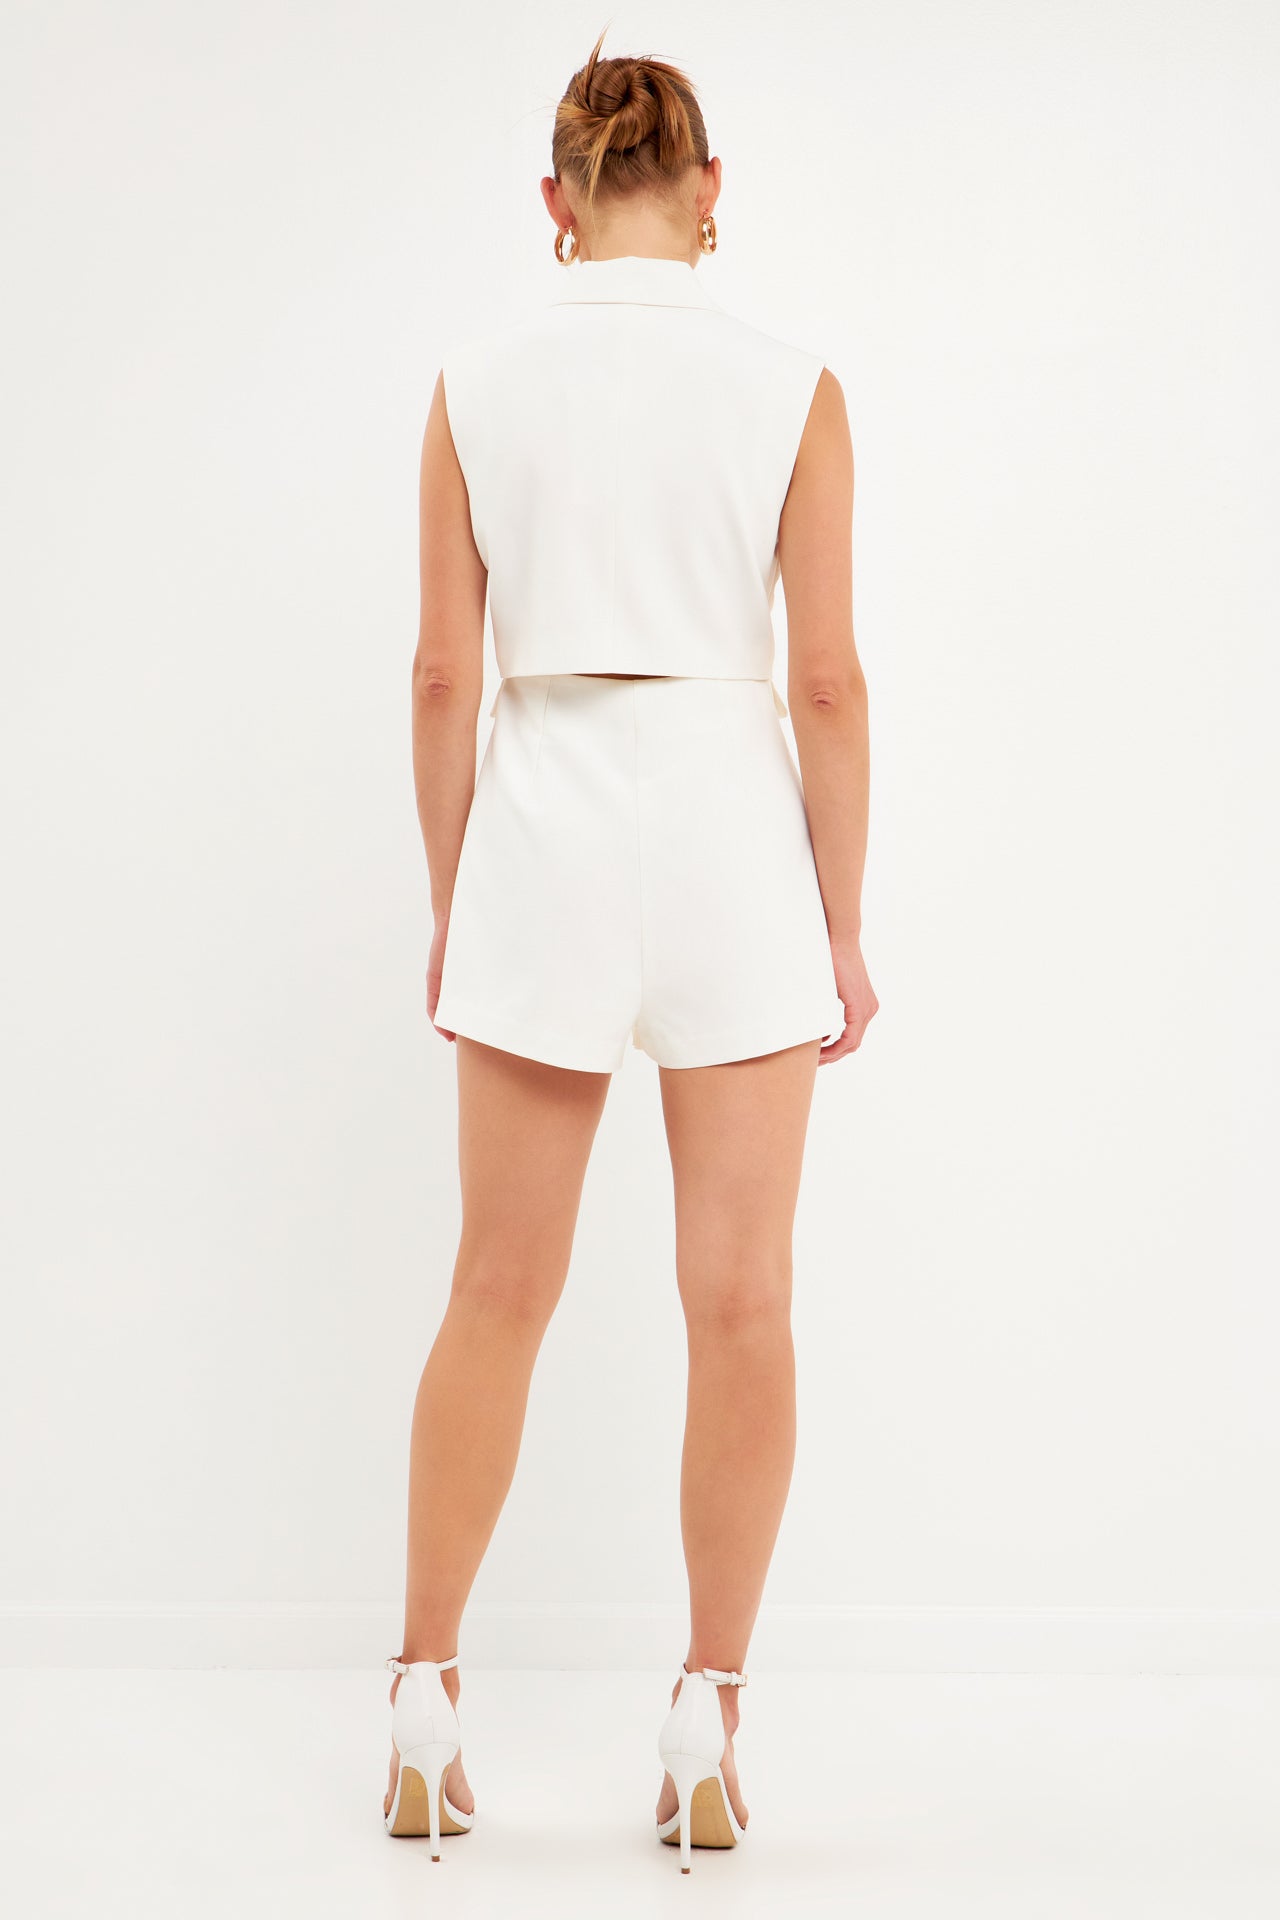 ENDLESS ROSE - Sleeveless Blazer Romper - ROMPERS available at Objectrare